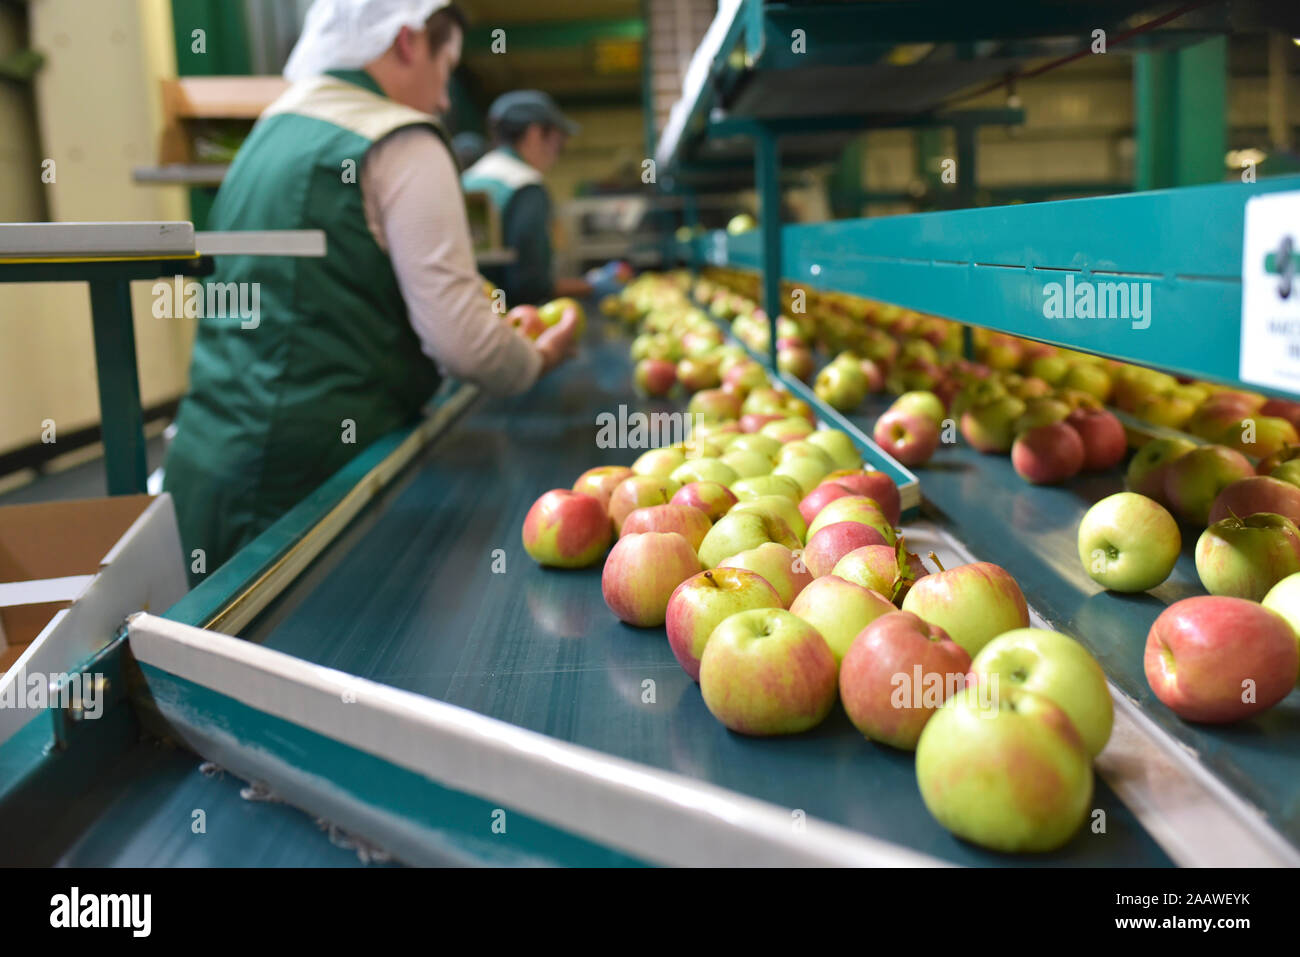 Female workers checking apples on conveyor belt in apple-juice factory Stock Photo